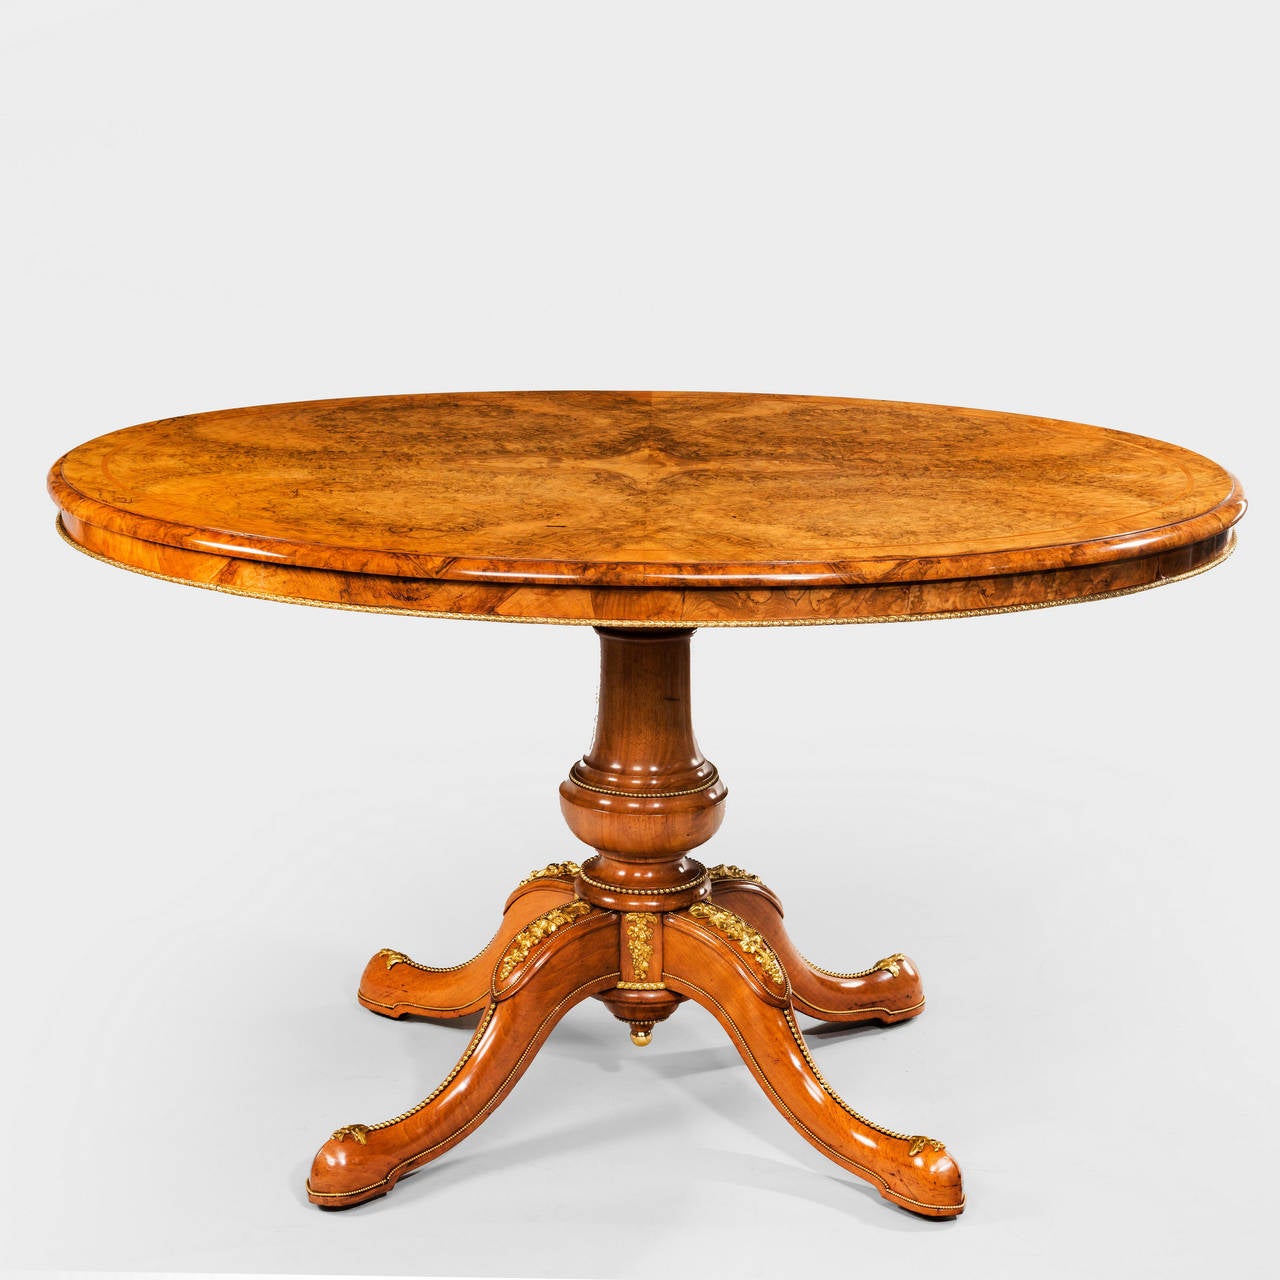 An exhibition quality burr walnut and ormolu-mounted centre table with superb quartered veneered top. Attributed to Holland and Sons or Gillows.